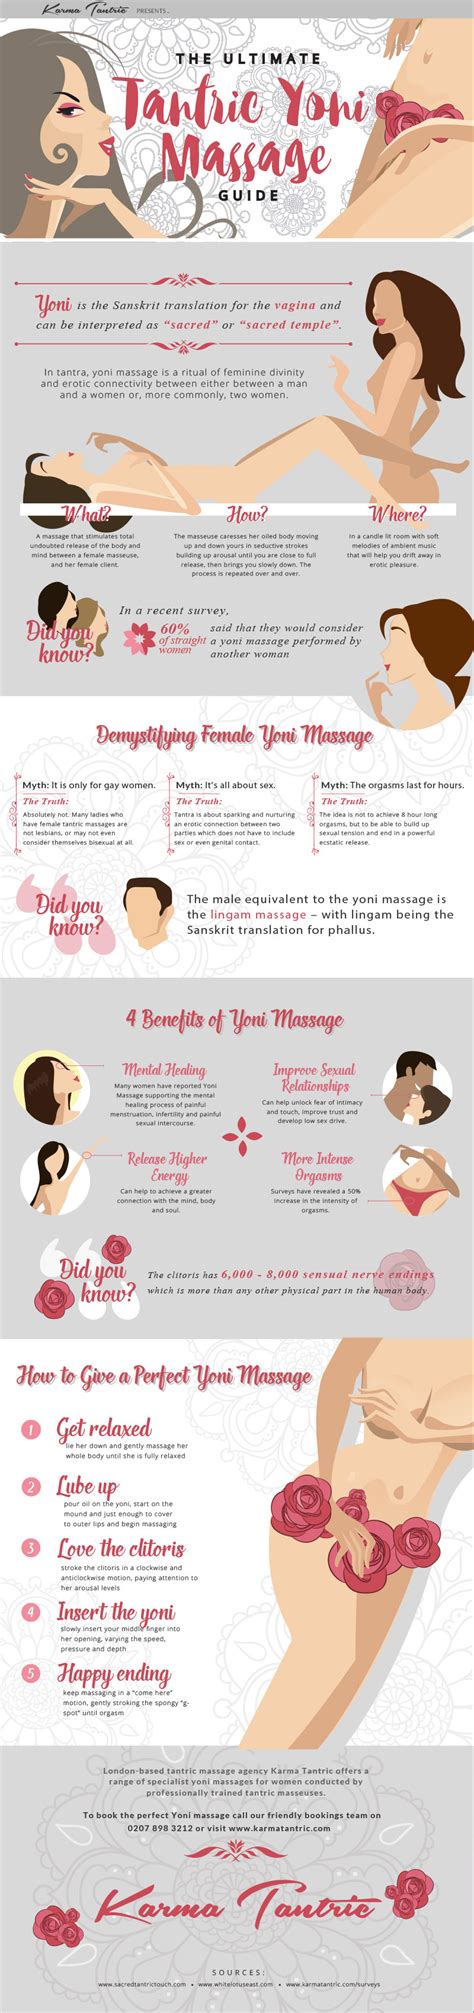 the ultimate yoni massage guide [infographic